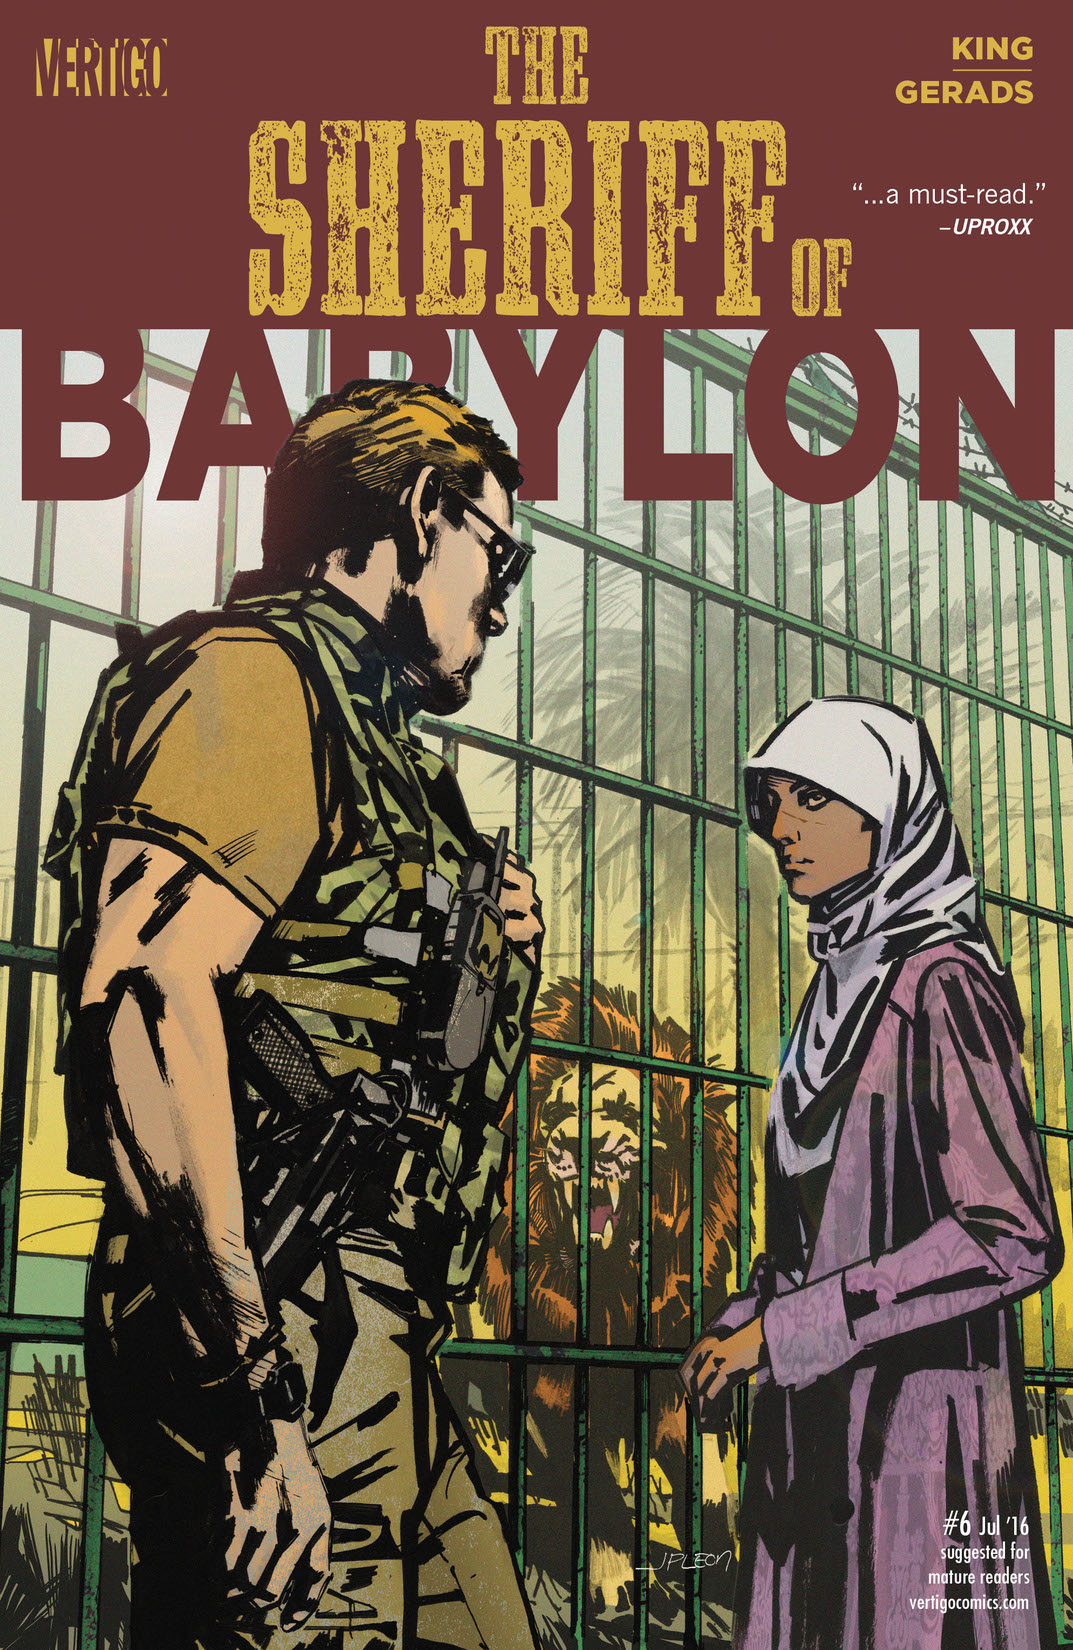 Sheriff of Babylon #6 preview images